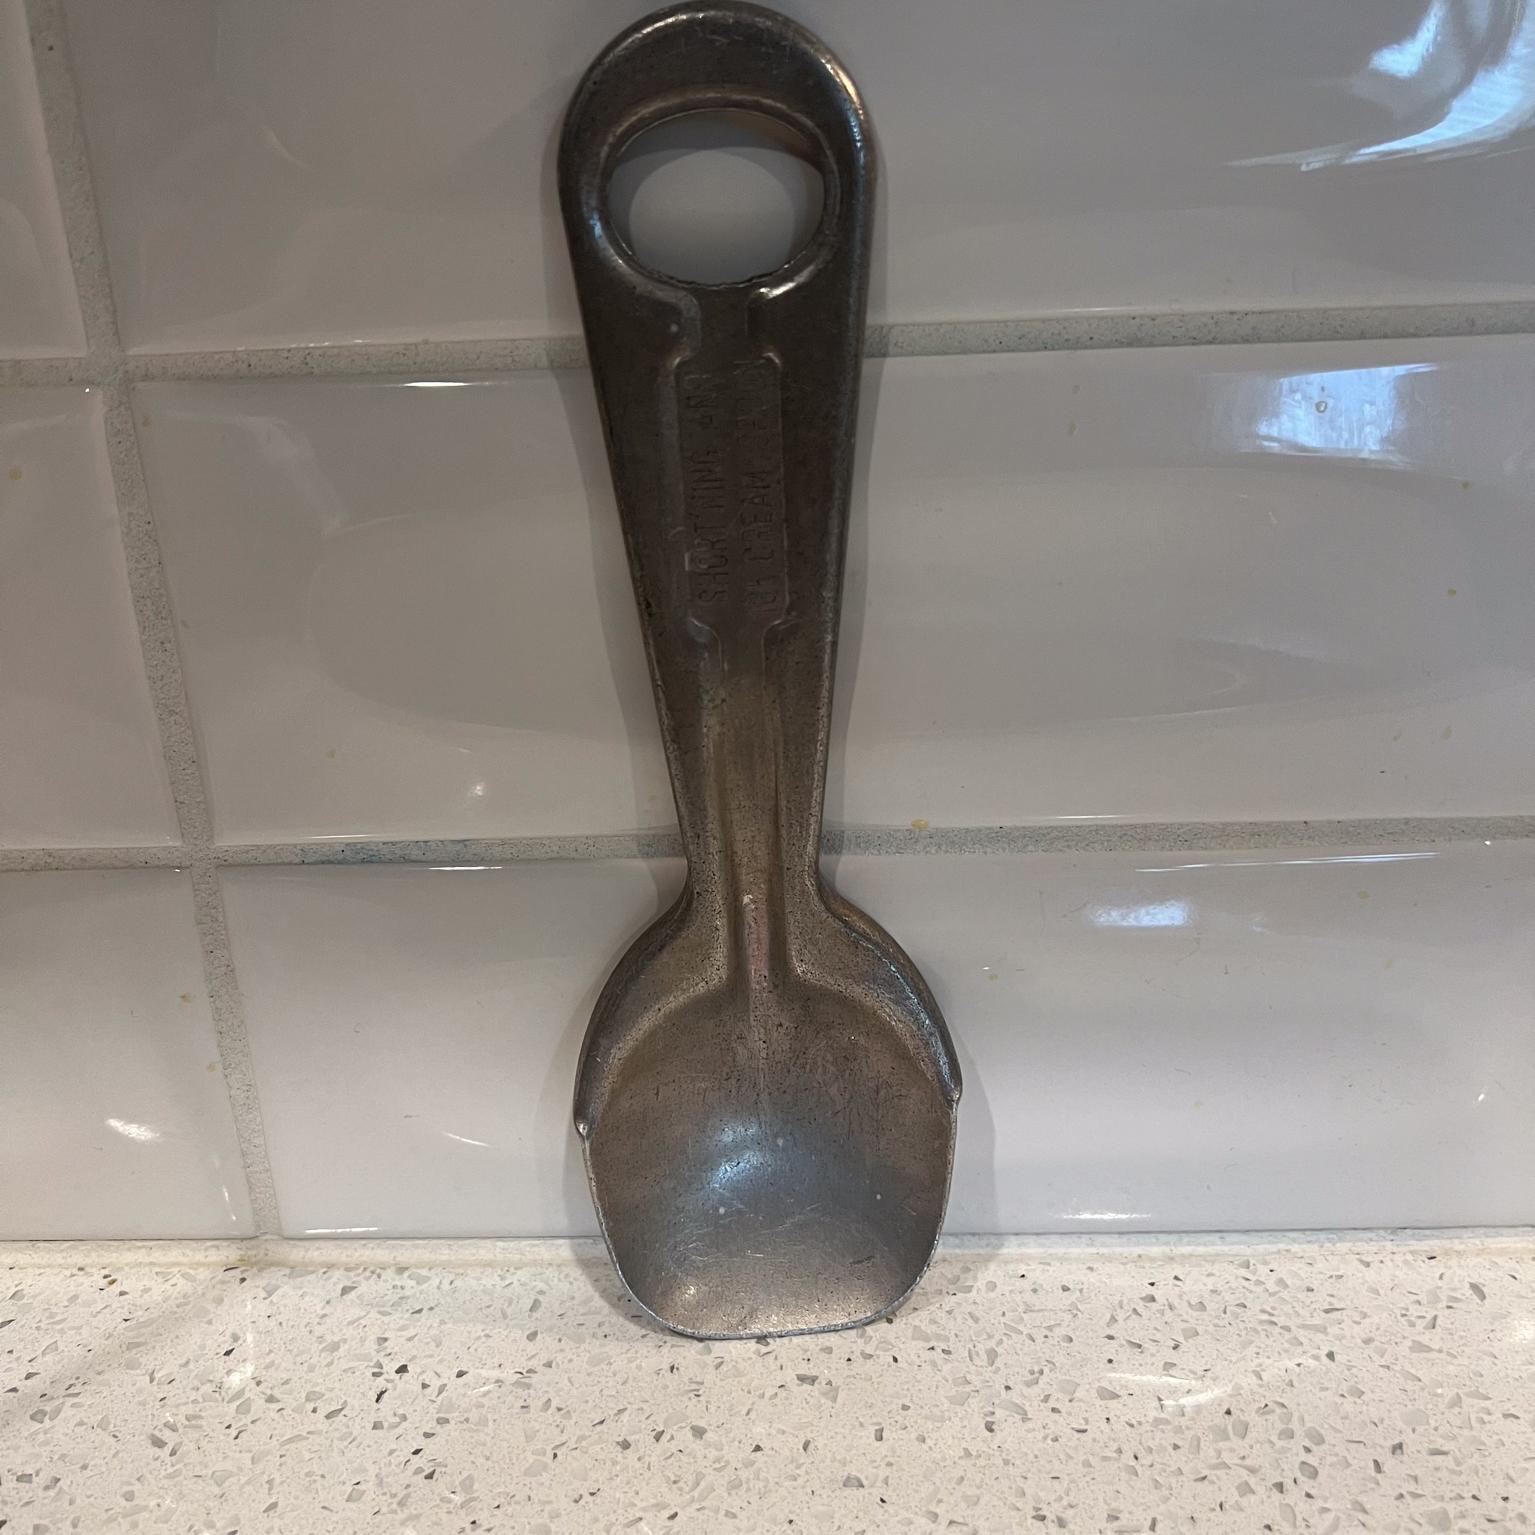 
Midcentury Modern Ice Cream Scoop Shortening Scoop
8 long x 2.63 w x .75 d
Preowned vintage unrestored condition, please see images provided.